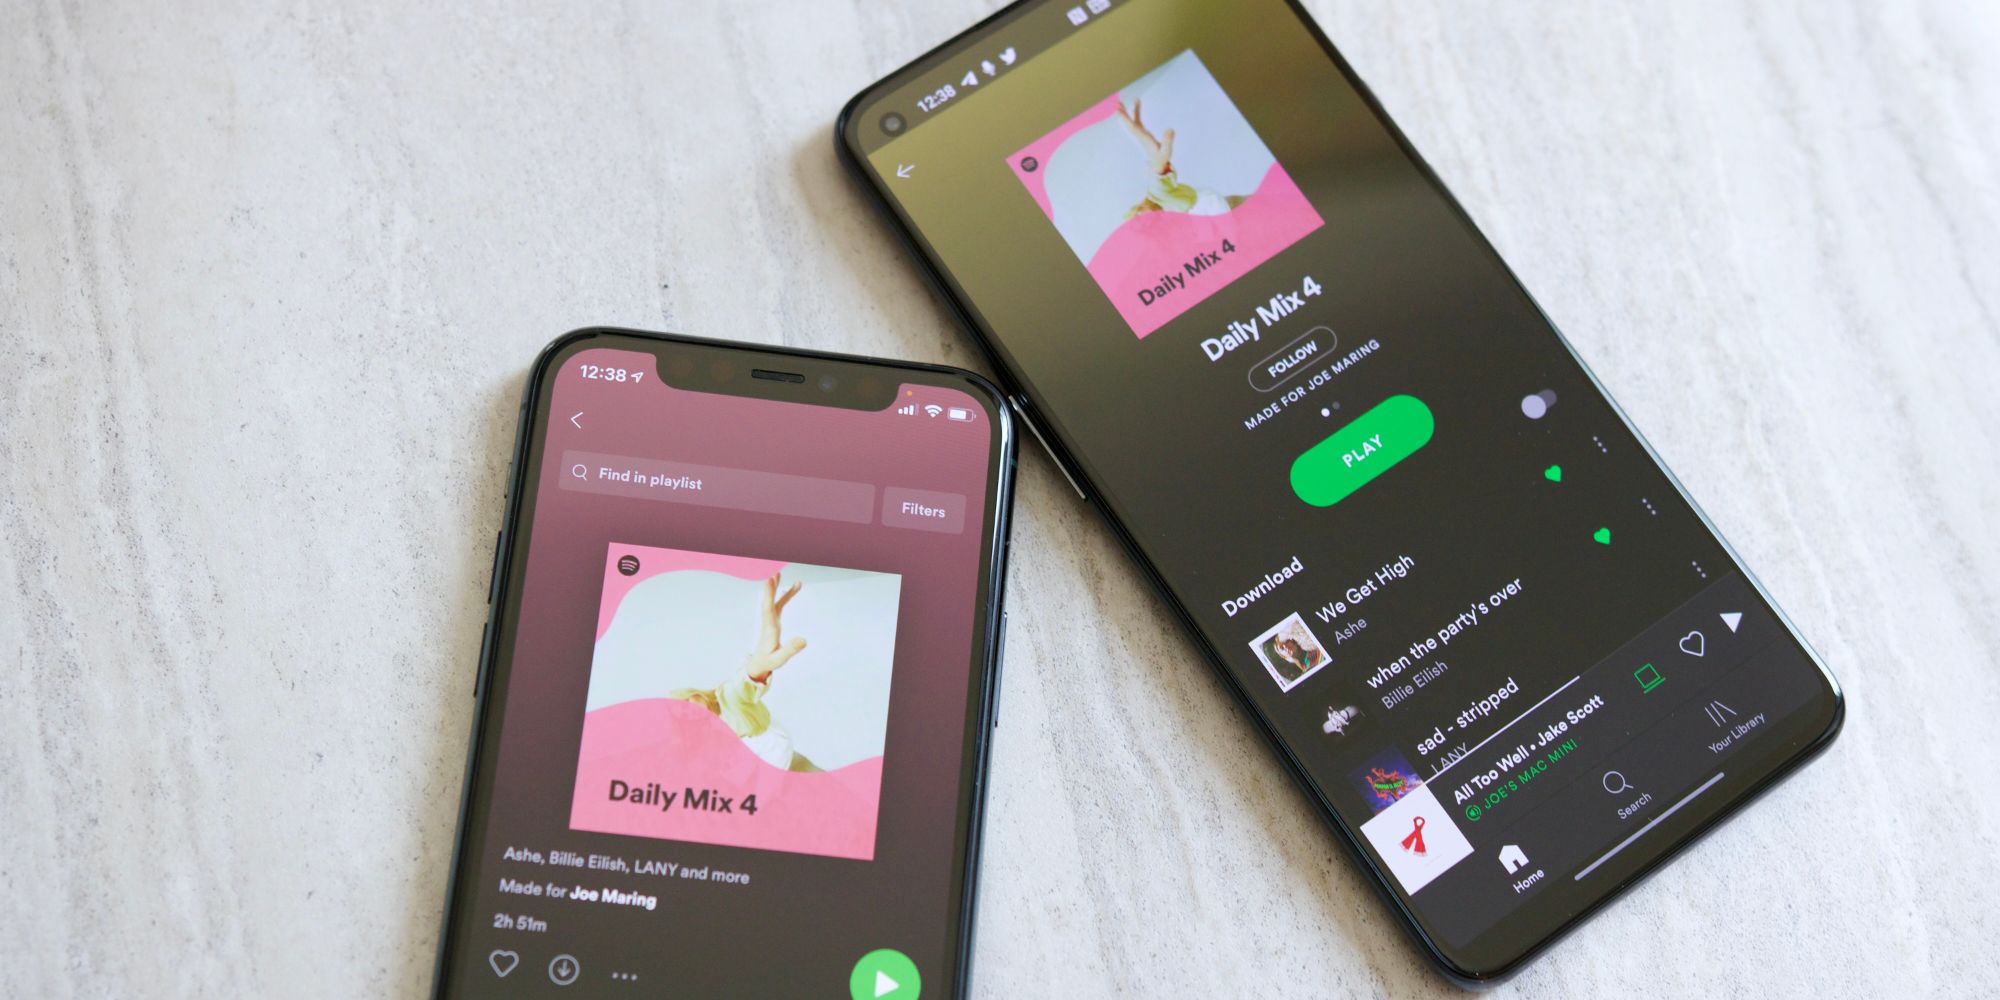 Spotify app on an iPhone and Android phone